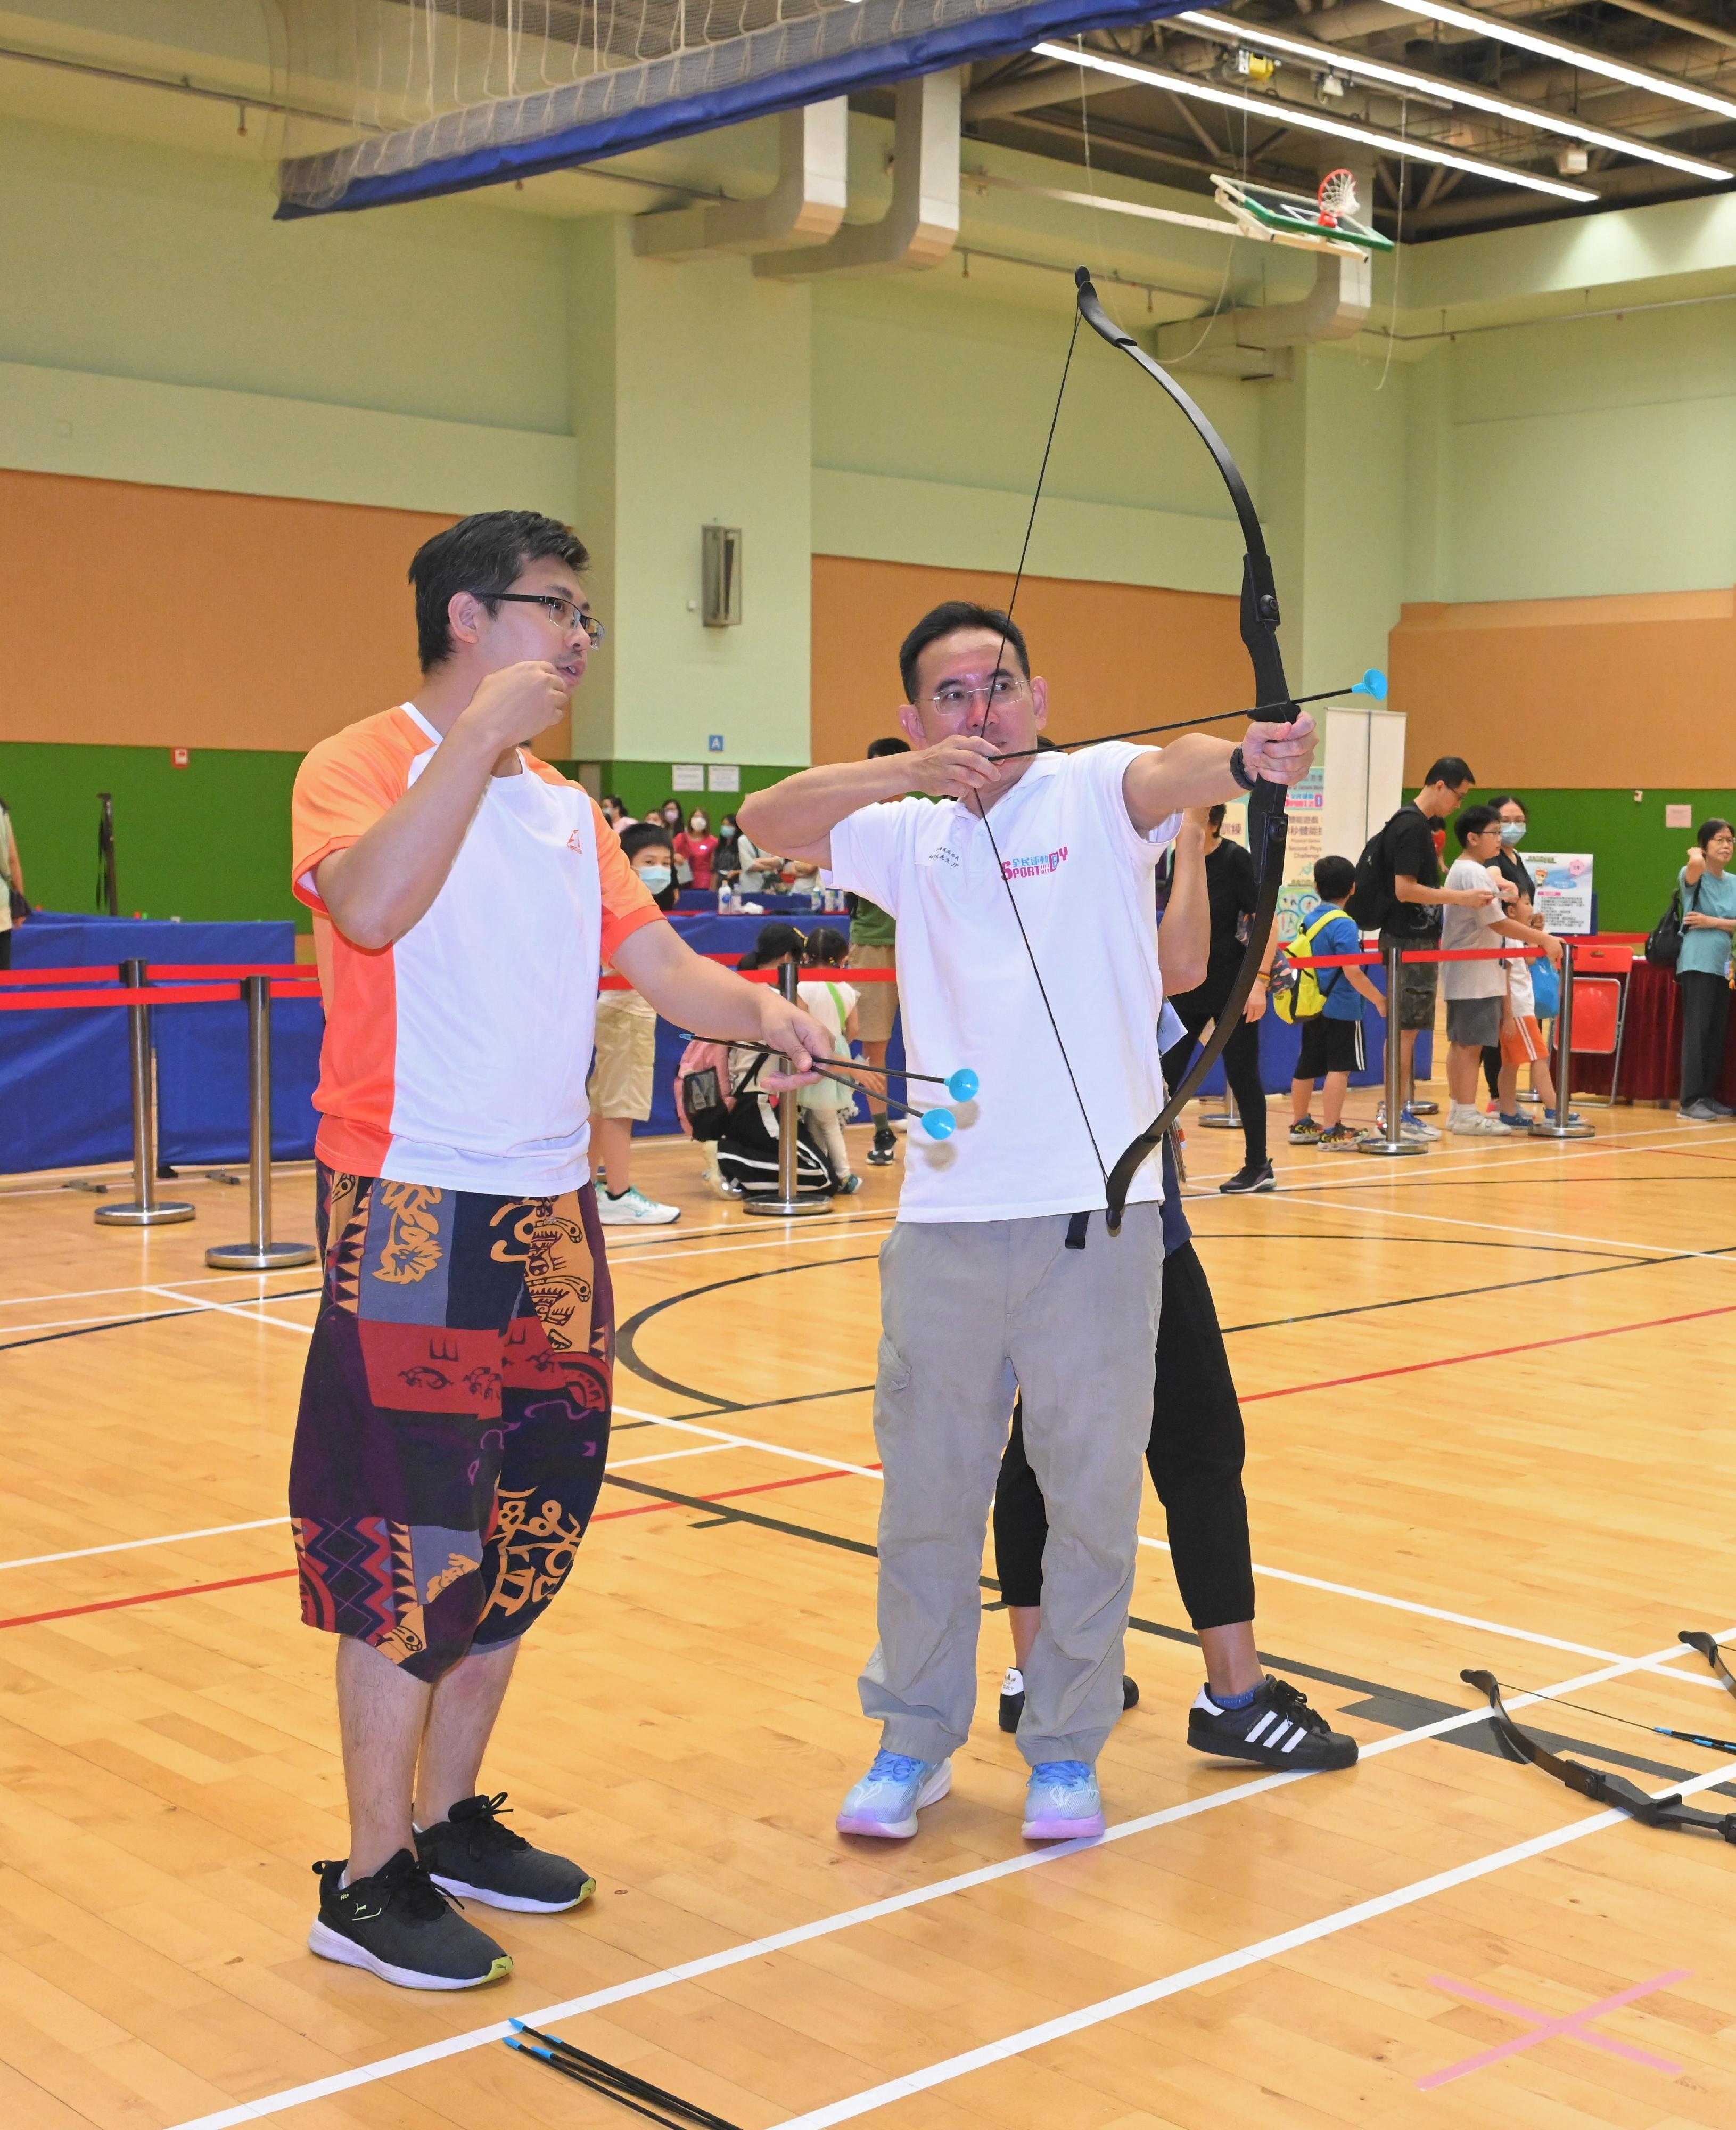 The Acting Secretary for Development, Mr David Lam, participated in the Sport For All Day 2023 activities organised by the Leisure and Cultural Services Department at Island East Sports Centre today (August 6). Photo shows Mr Lam (right) joining an archery session.